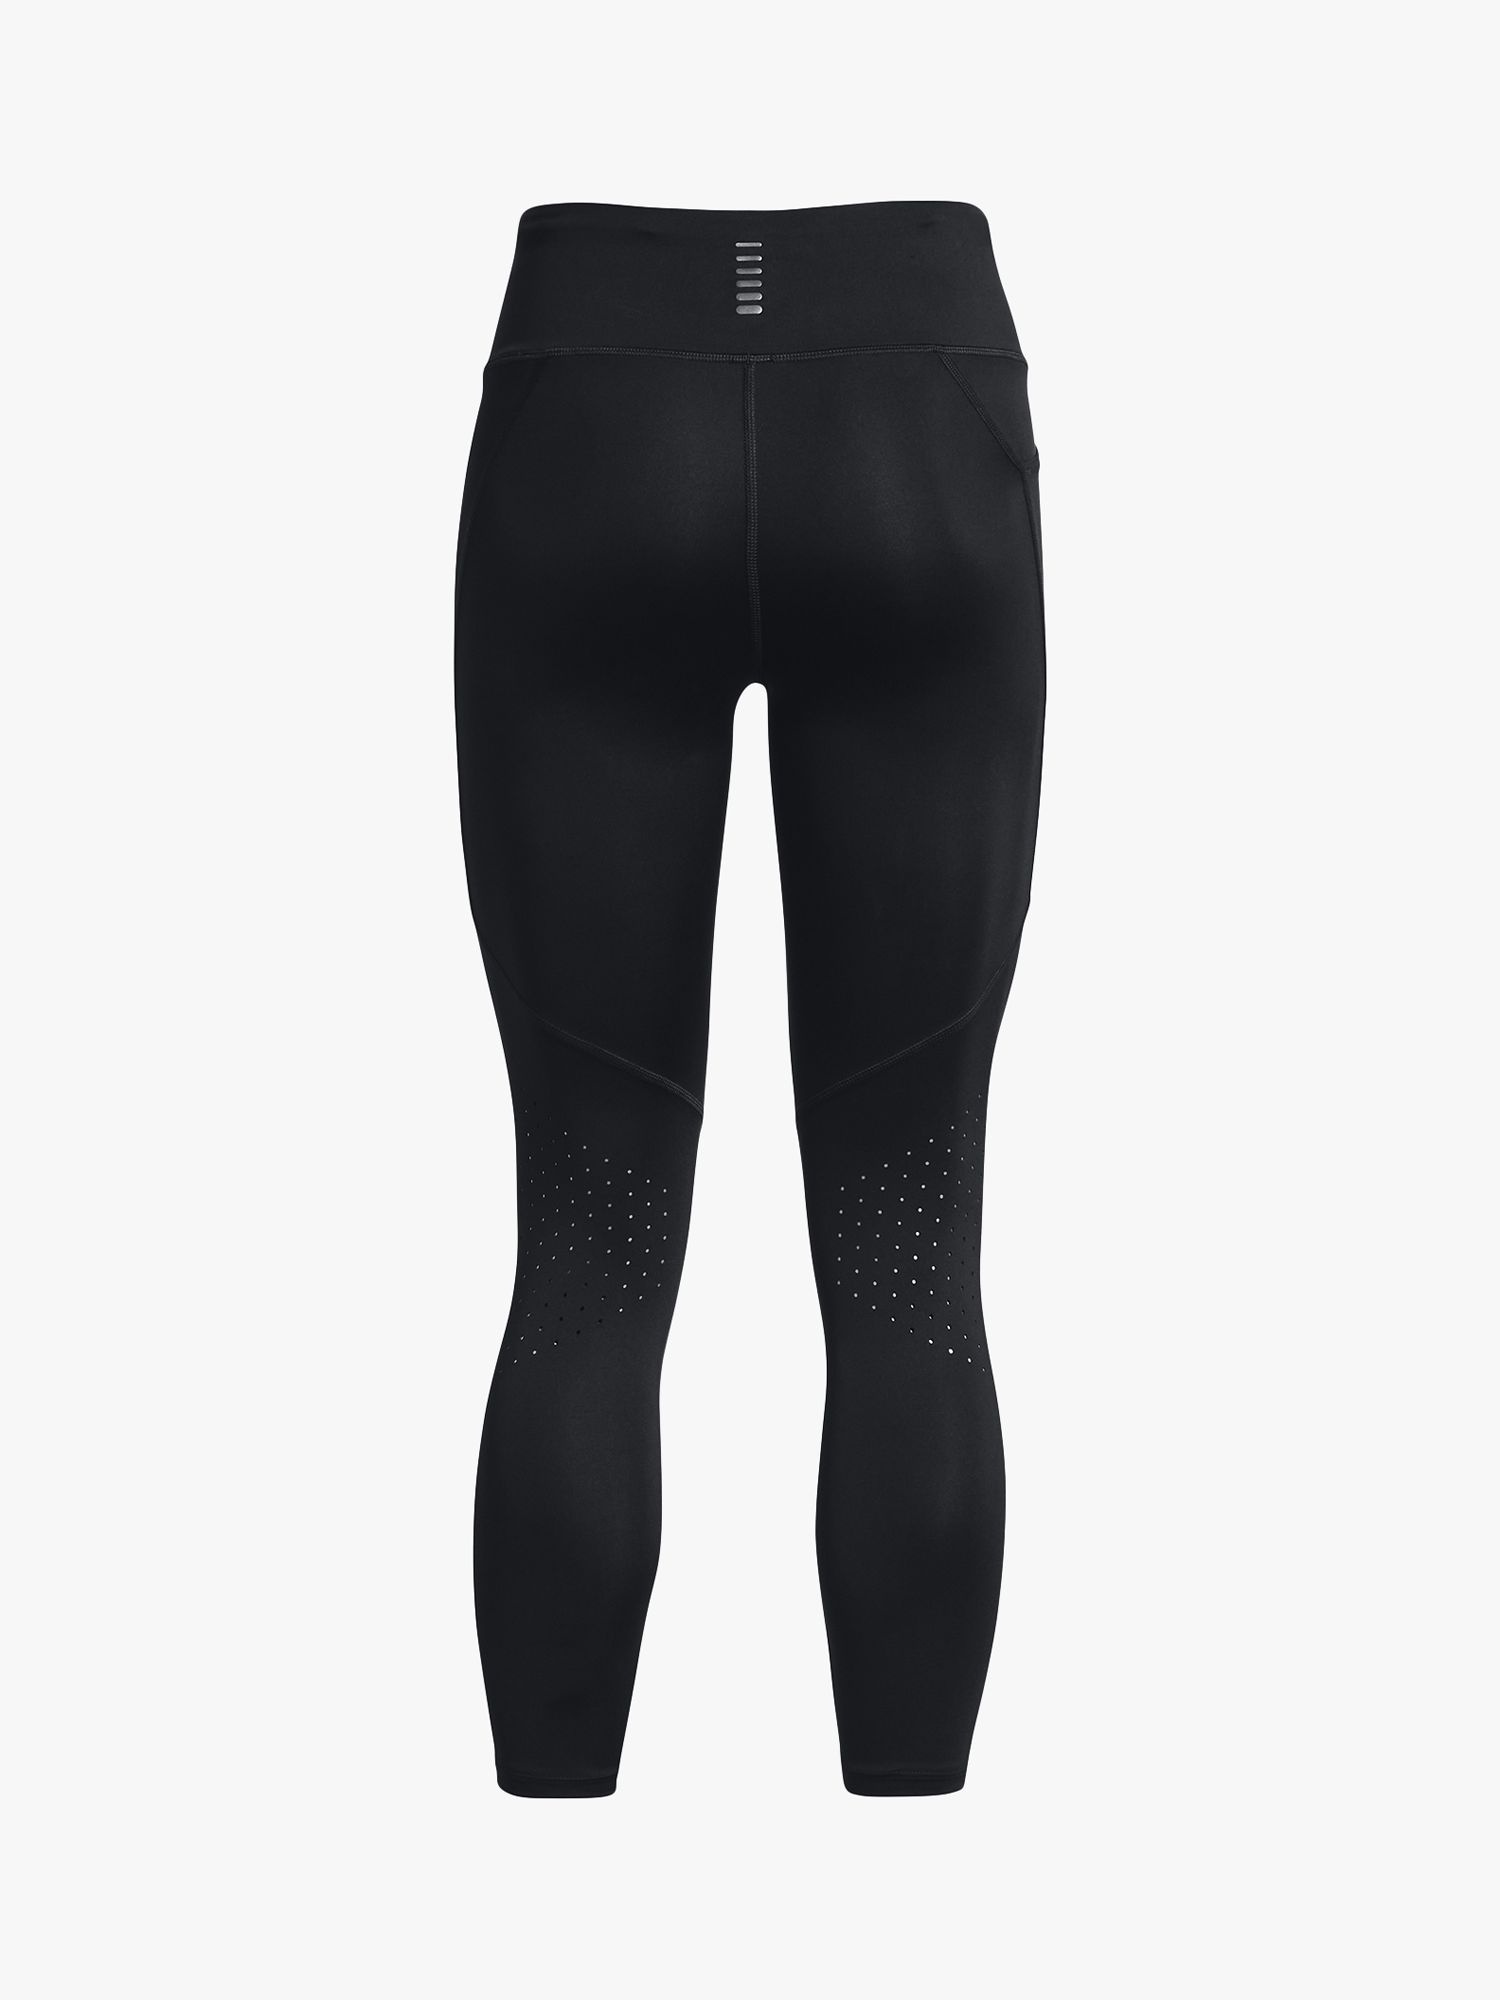 Under Armour Womens Fly Fast Mesh Panel Athletic Leggings,Black,Large